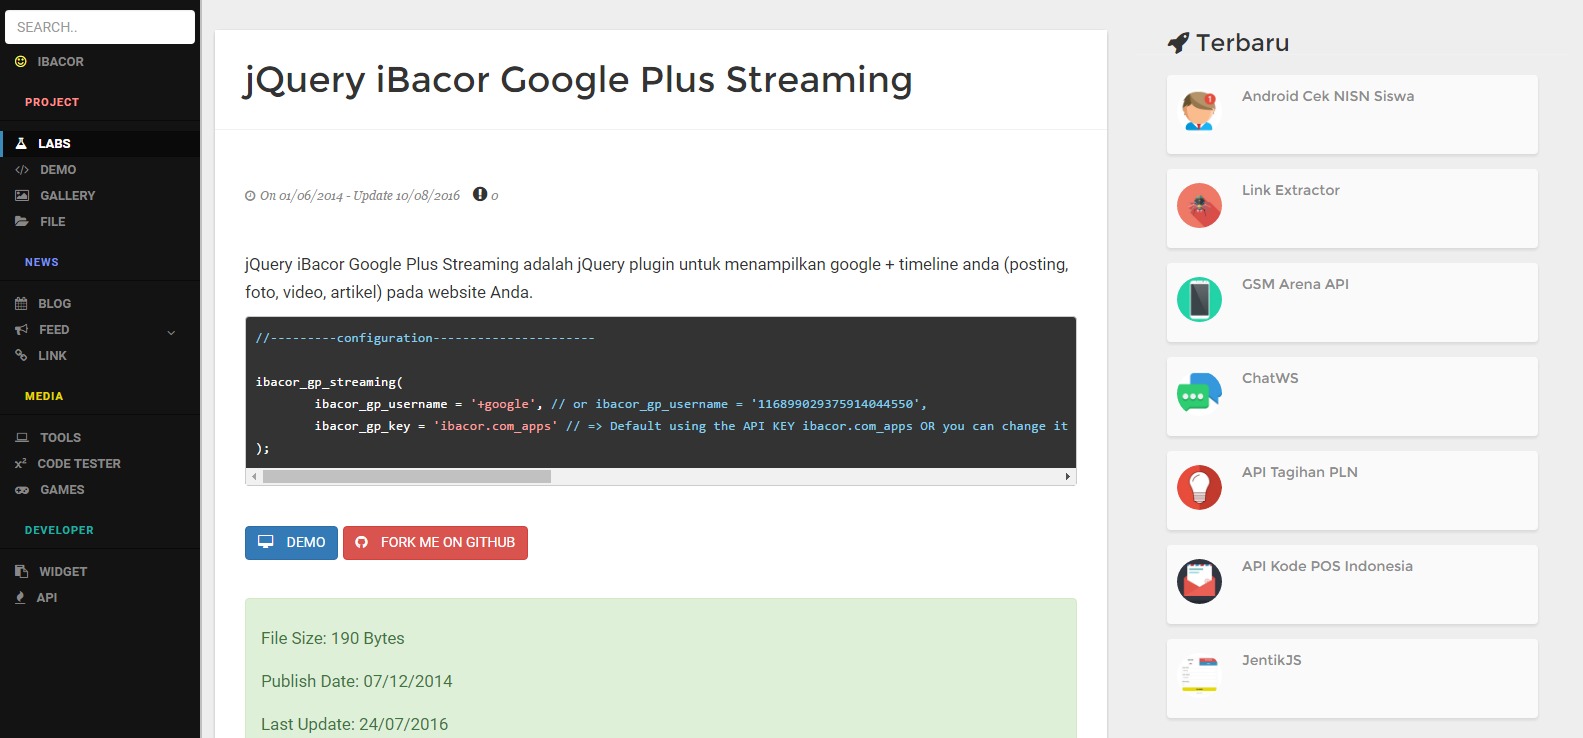 jQuery iBacor Google Plus Streaming